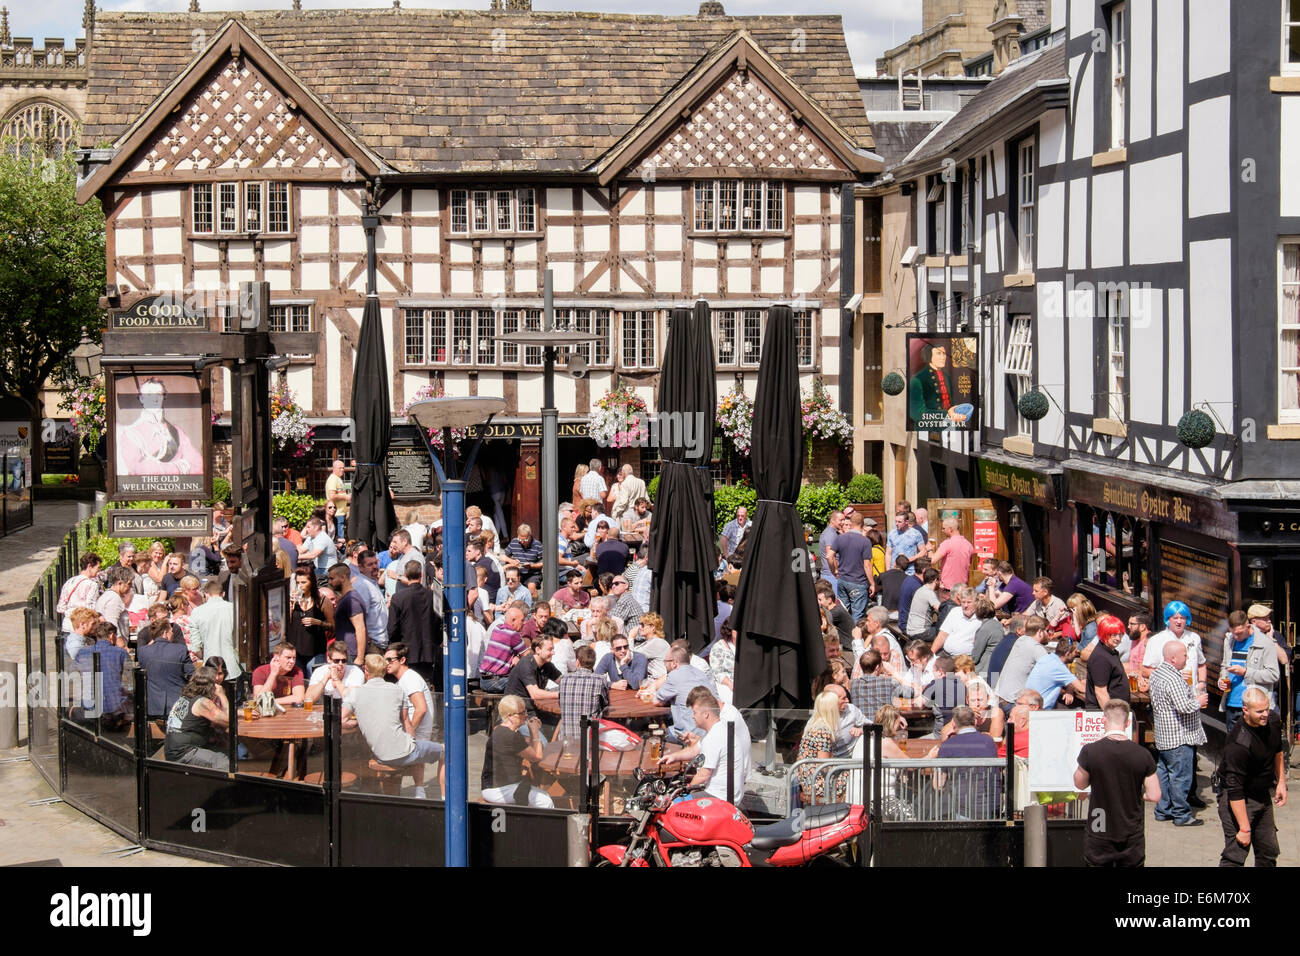 Sinclair's Oyster Bar and 16thc timbered The Old Wellington Inn with crowds of people in busy beer garden outside. Manchester UK Stock Photo